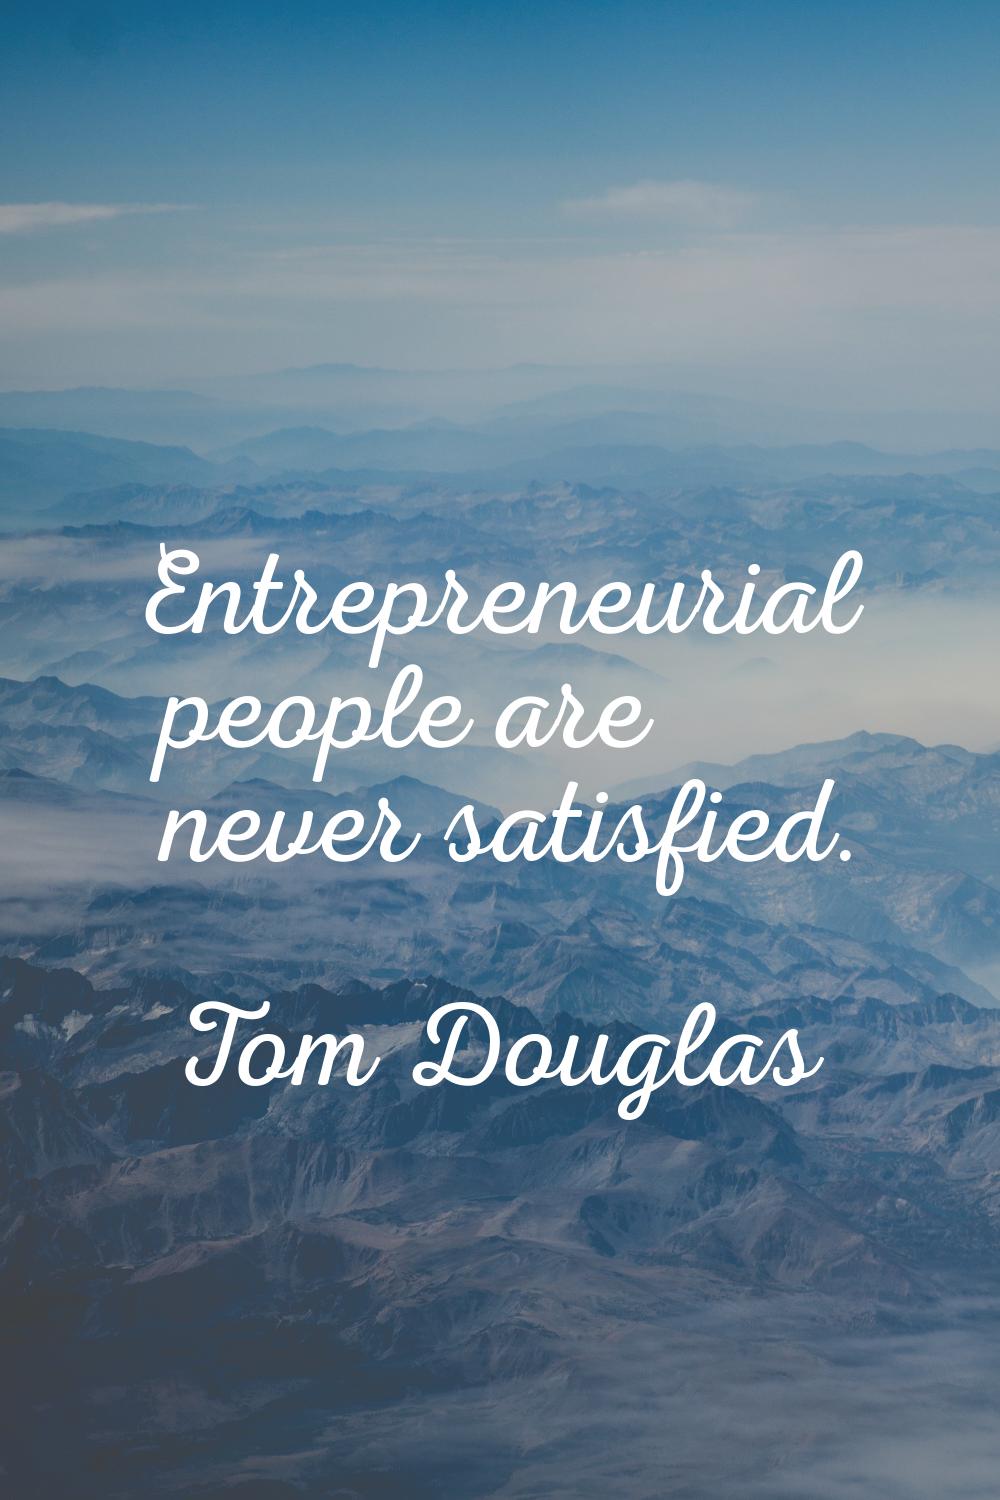 Entrepreneurial people are never satisfied.